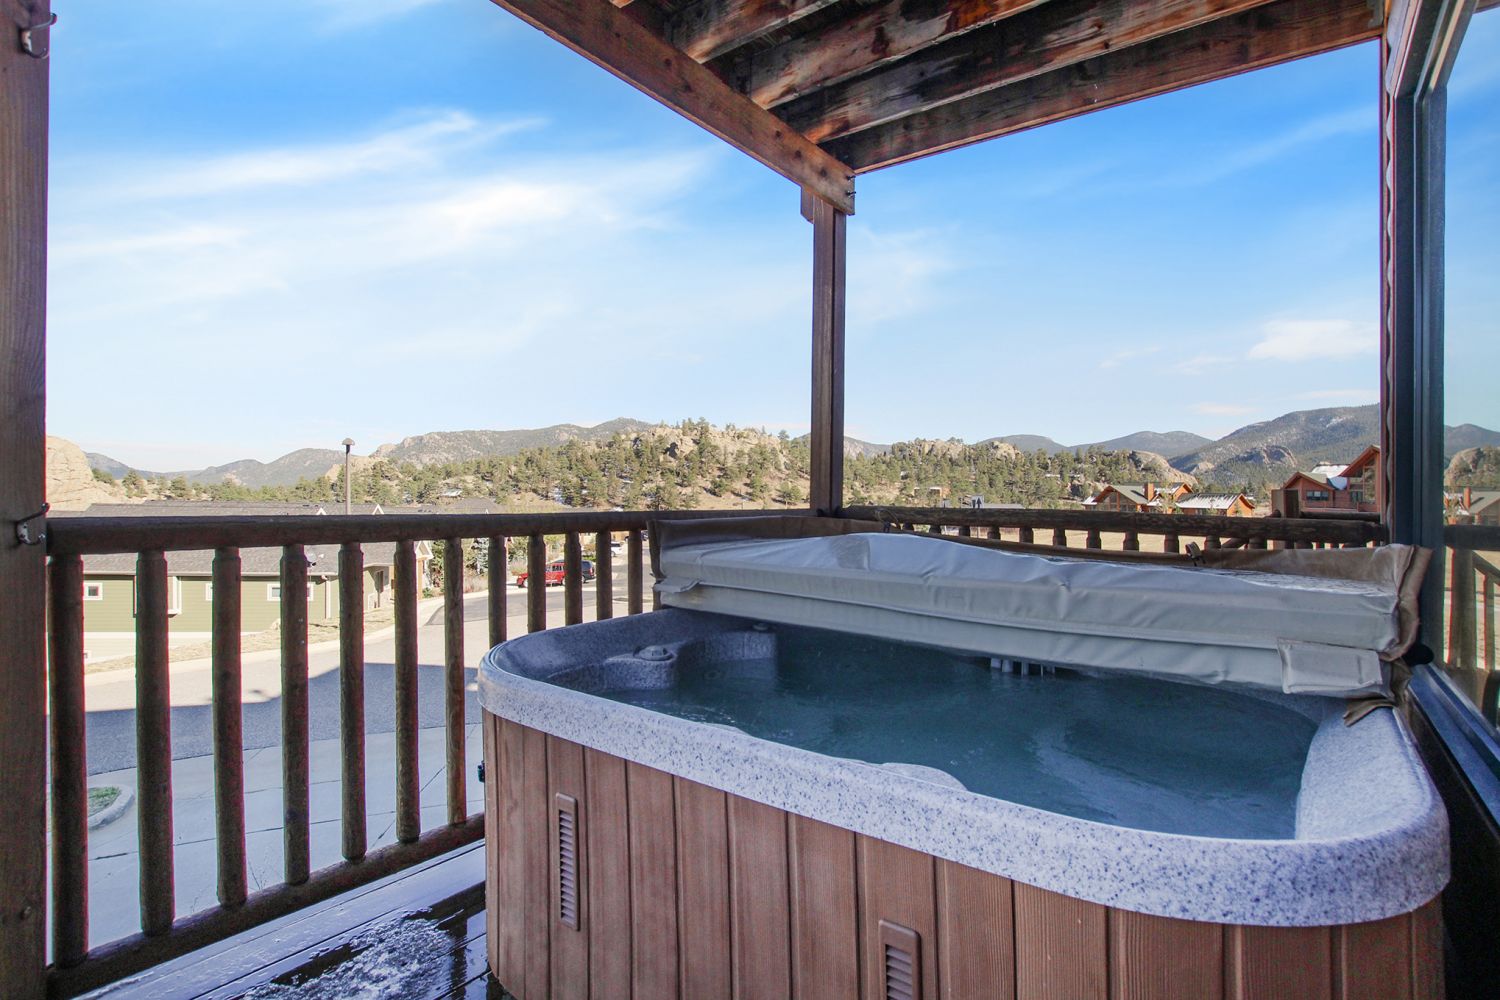 Nakai Peak 41B - Come relax and enjoy the privacy of a hot tub on the deck in fresh mountain air.